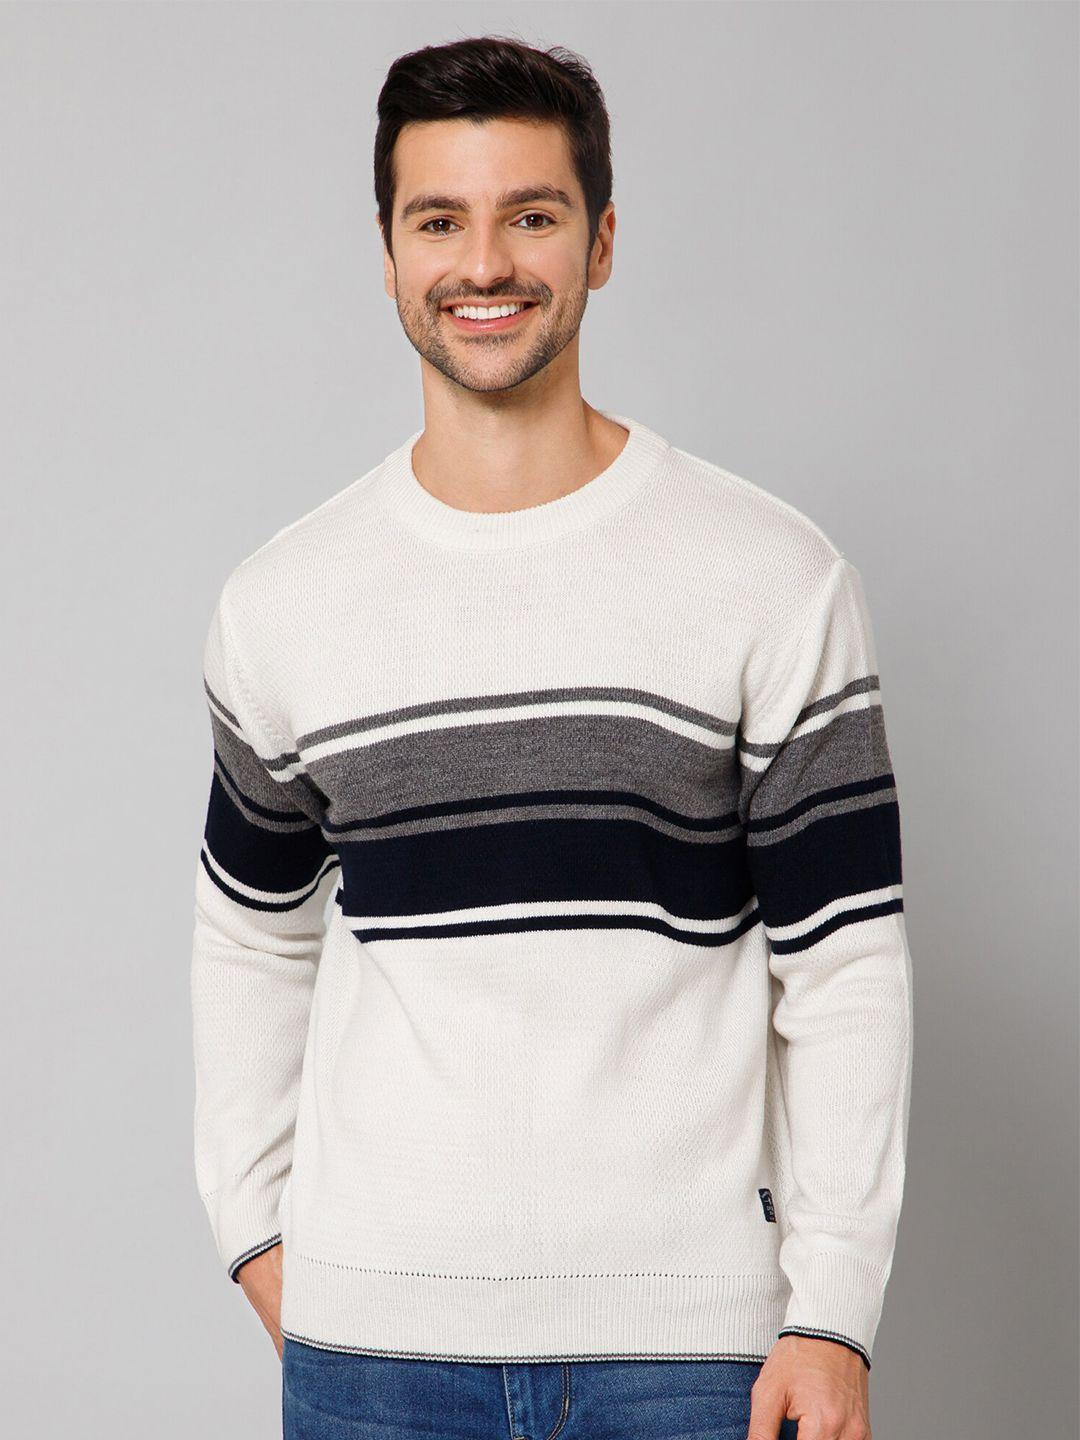 cantabil-striped-round-neck-acrylic-sweater